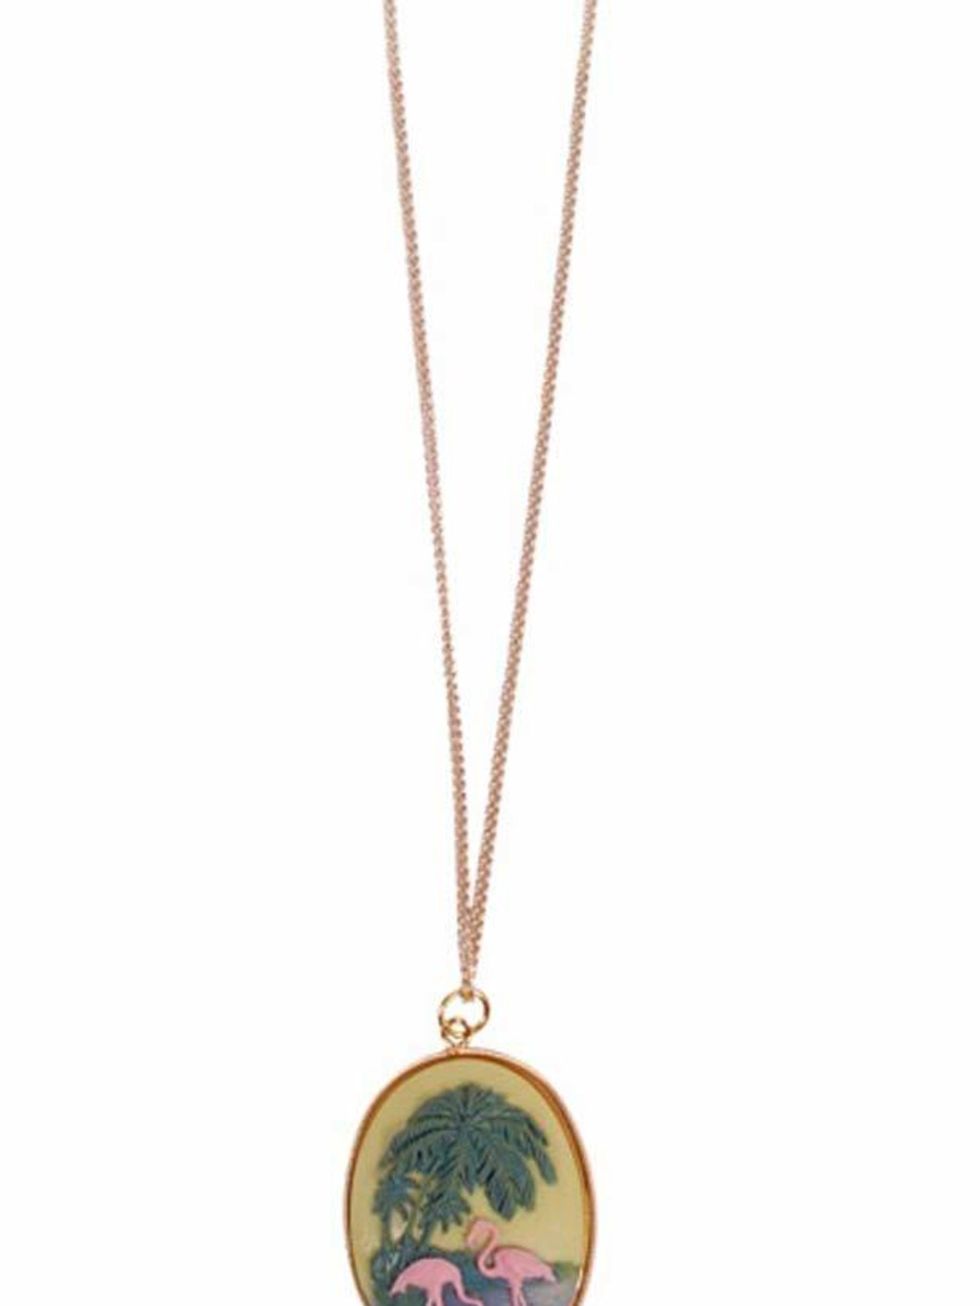 <p> </p><p>This quirky take on the classic cameo is perfect for adding a hit of kitsch summer colour Air de Sarah flamingo pendant necklace, £12, at <a href="http://www.pretaportobello.com/shop/jewellery/necklaces/air-de-sarah-flamingo-garden-necklace.as